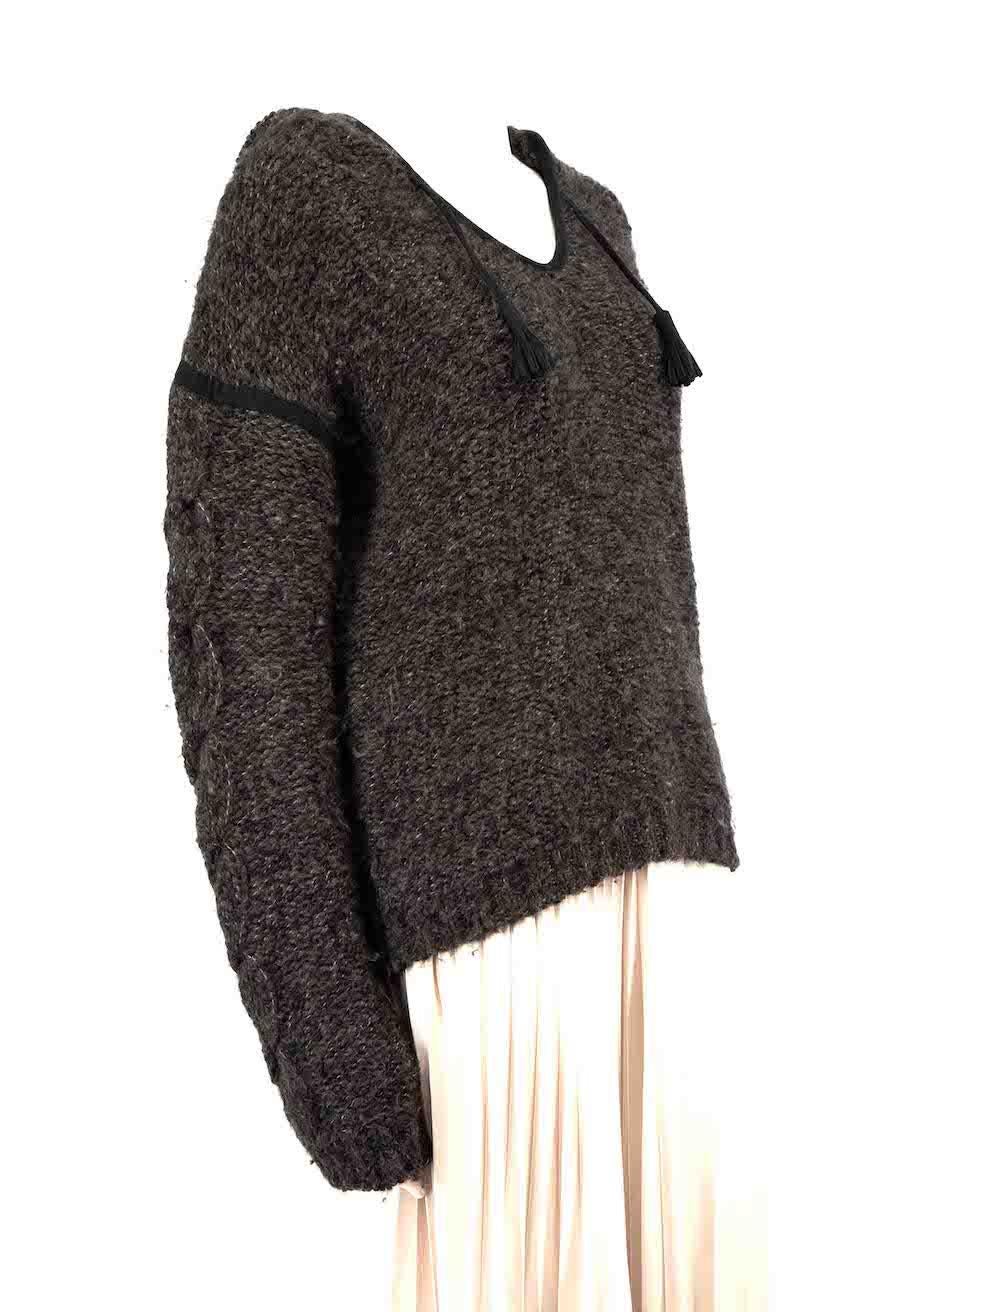 CONDITION is Very good. Hardly any visible wear to jumper is evident on this used Isabel Marant designer resale item.
 
 
 
 Details
 
 
 Grey
 
 Wool
 
 Long sleeves jumper
 
 Hooded
 
 Knitted and stretchy
 
 Suede tie strap on neckline
 
 
 
 
 
